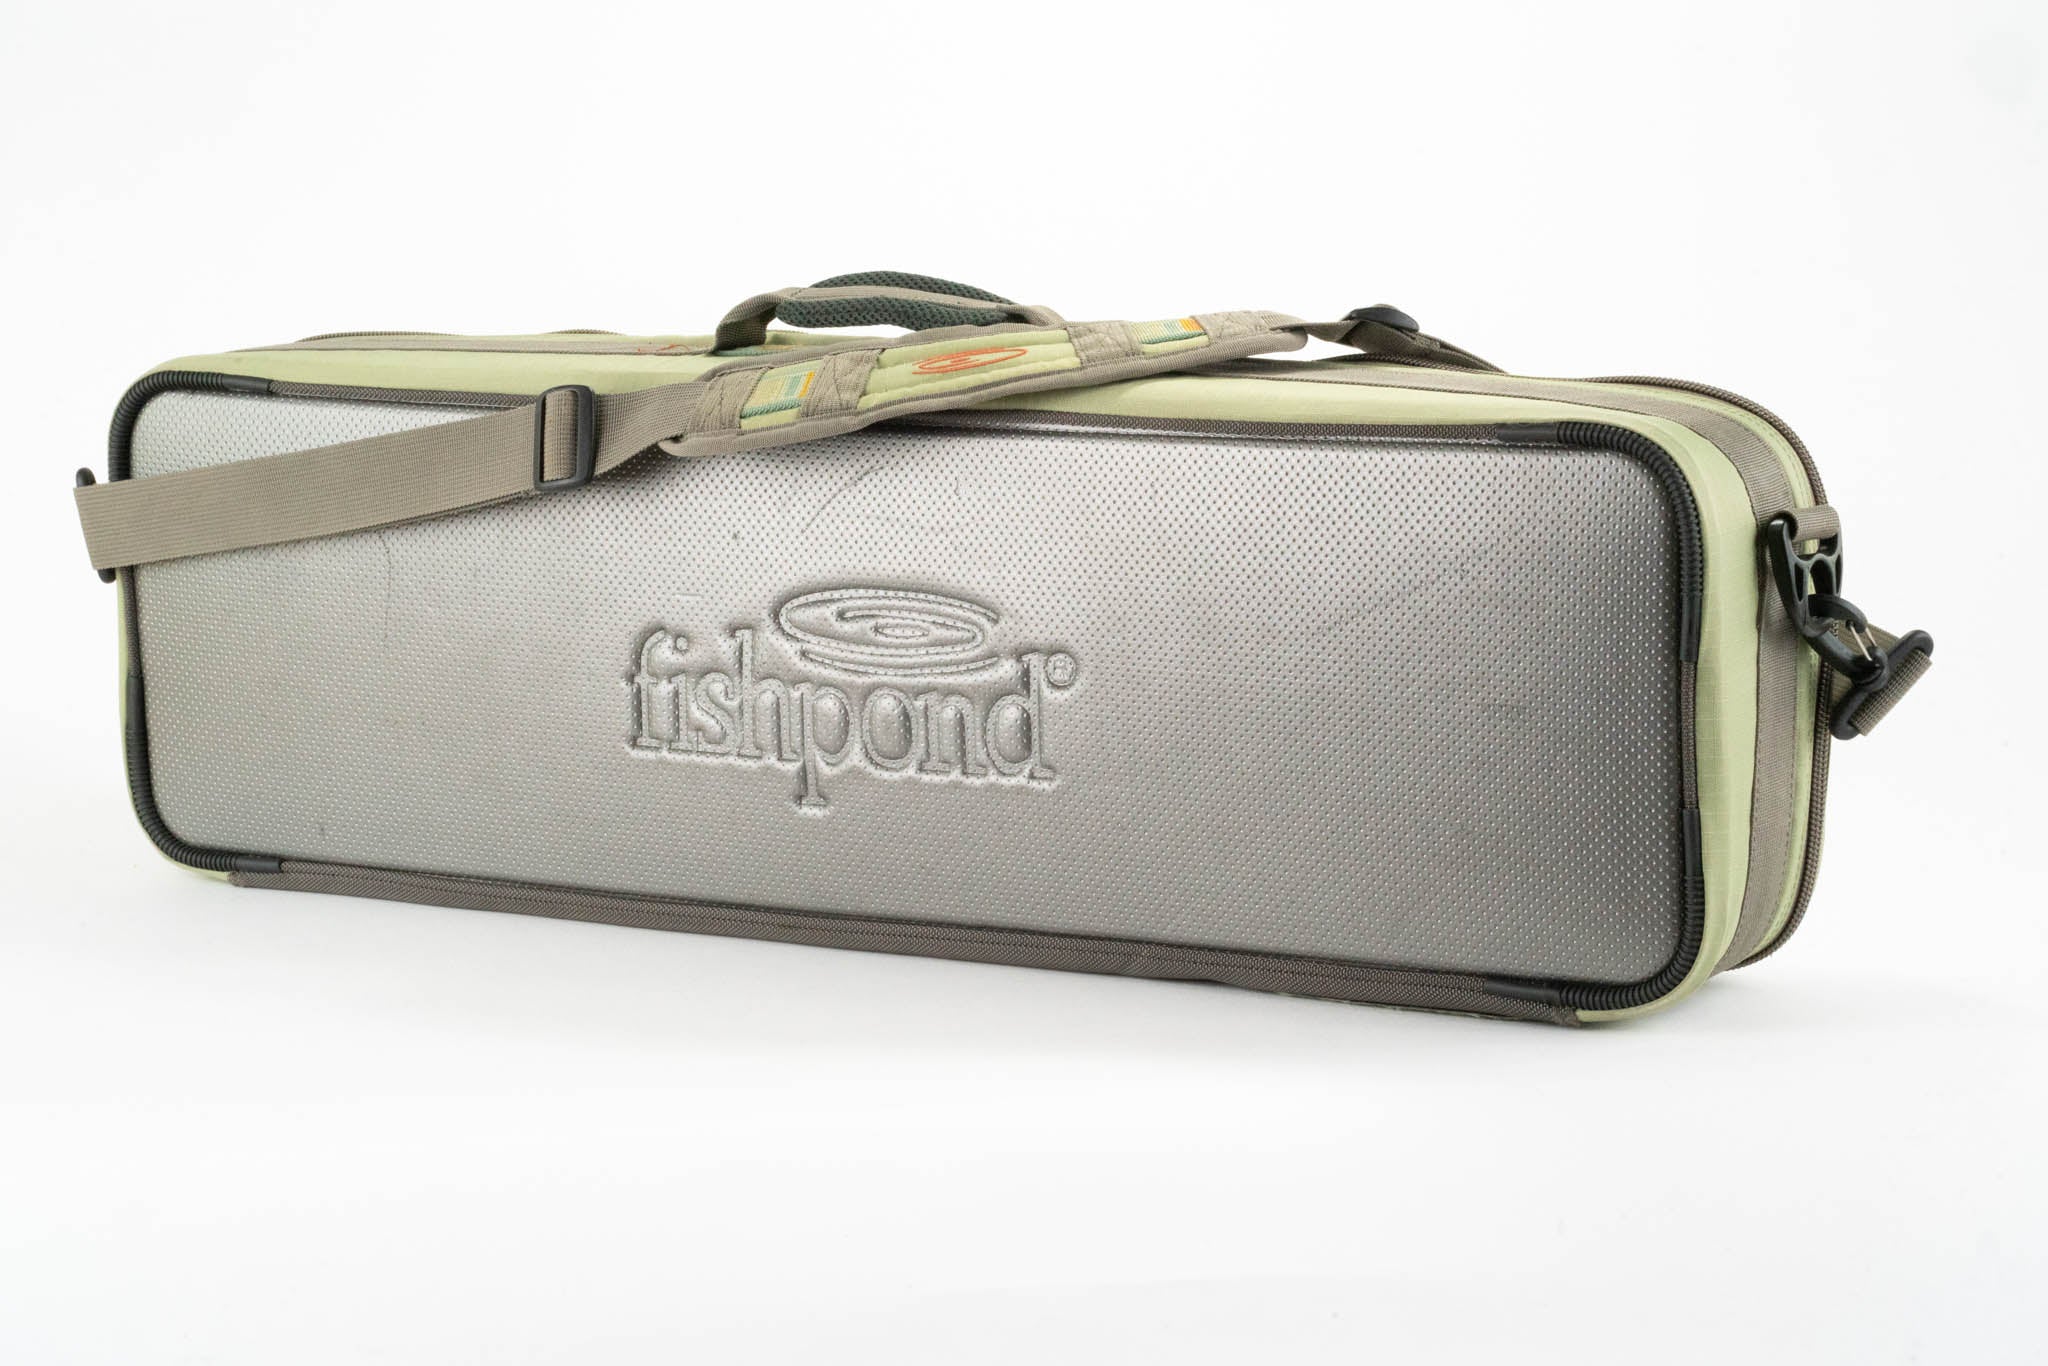 Fishpond Carry-On Rod and Reel Case